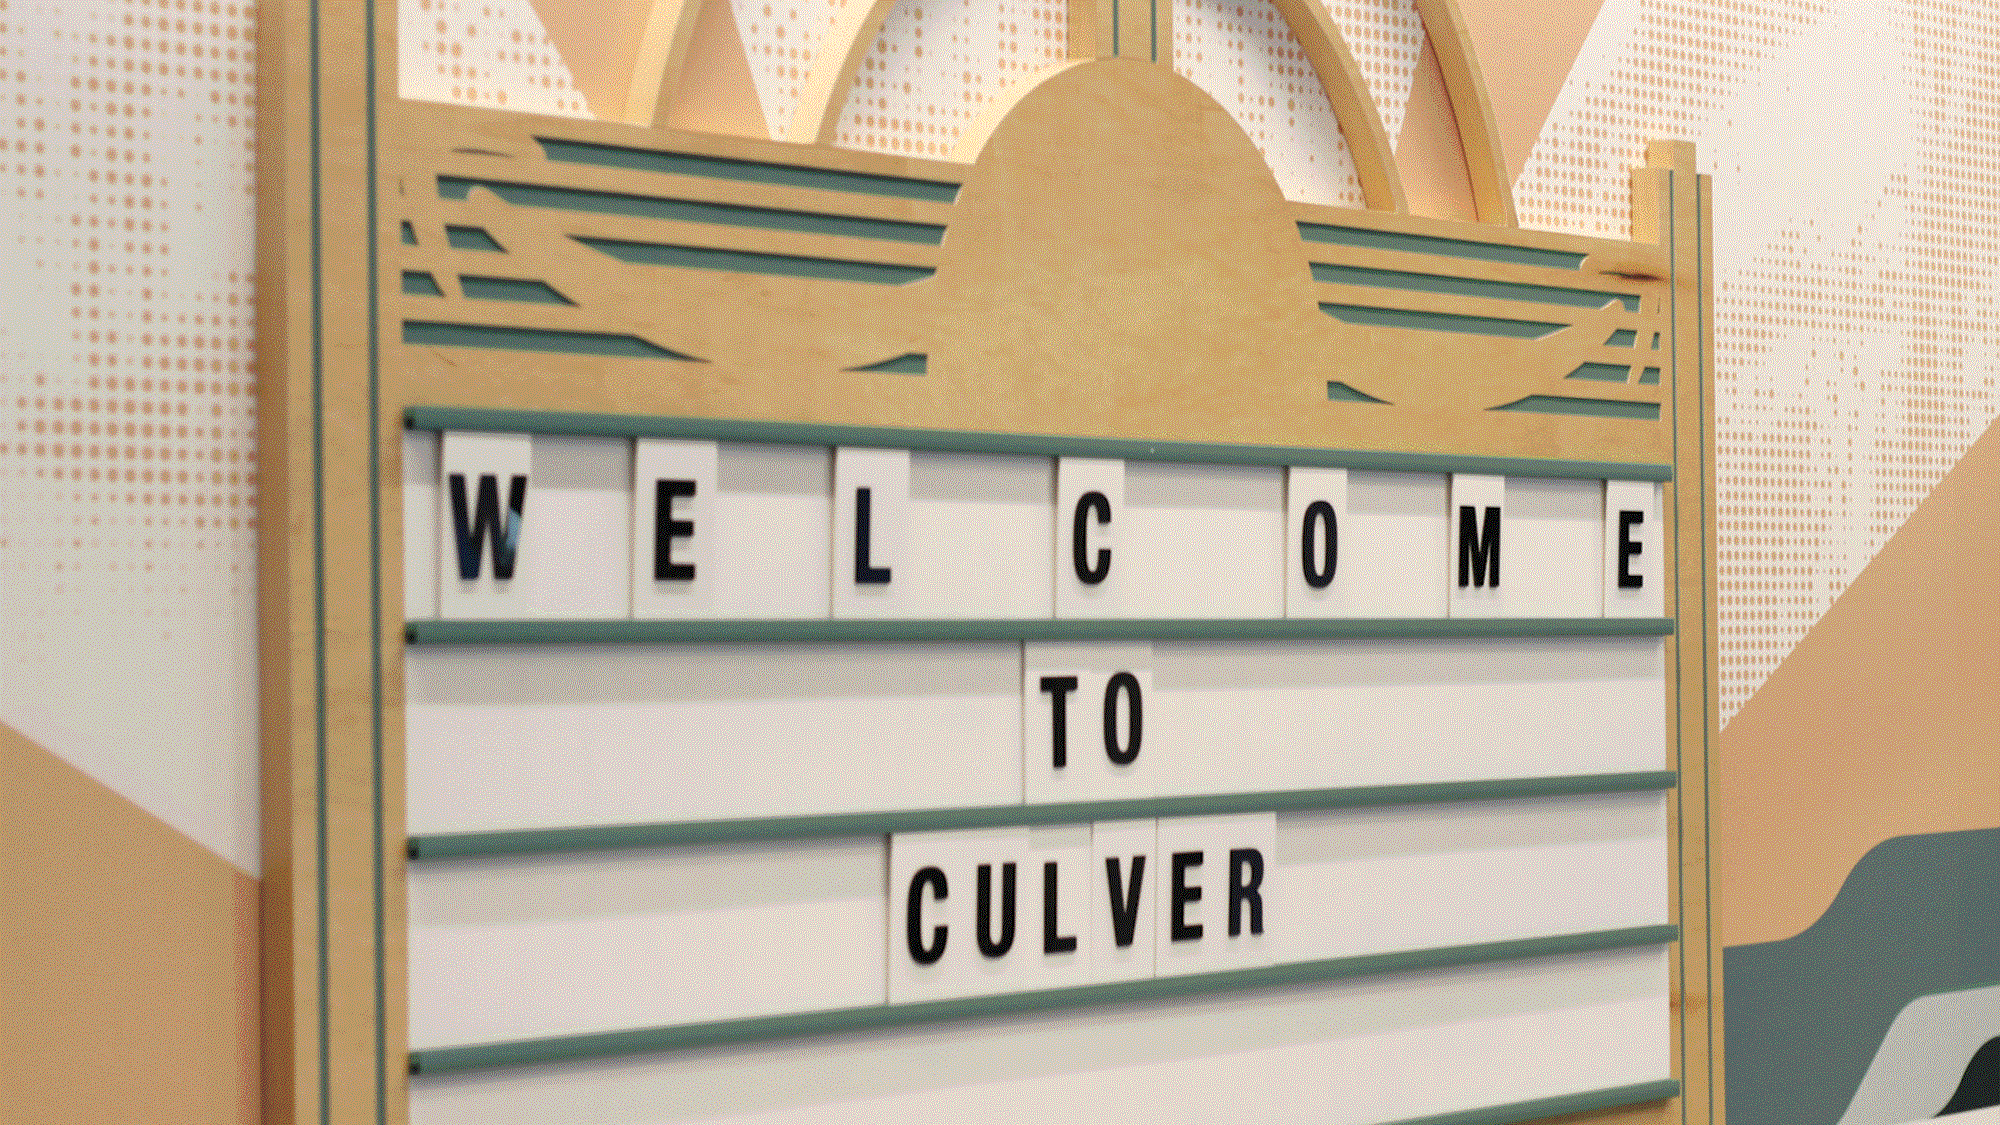 An animated GIF showing images from the Amazon campus in Culver City, California.